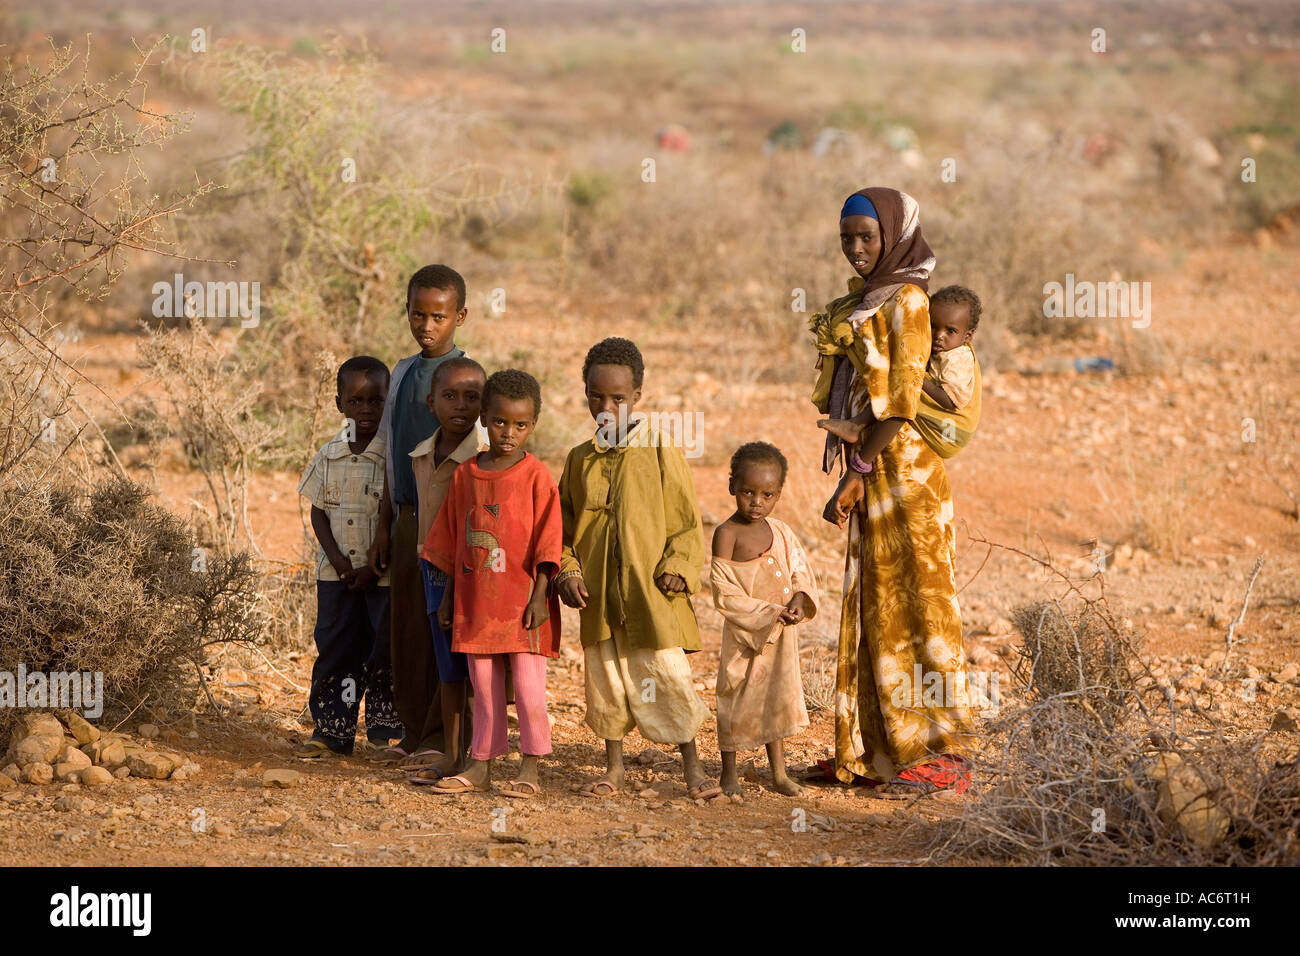 GARBAHARRE WESTERN SOMALIA 27th FEB 2006 Children stand about in the make shift camp on the edge of town Stock Photo